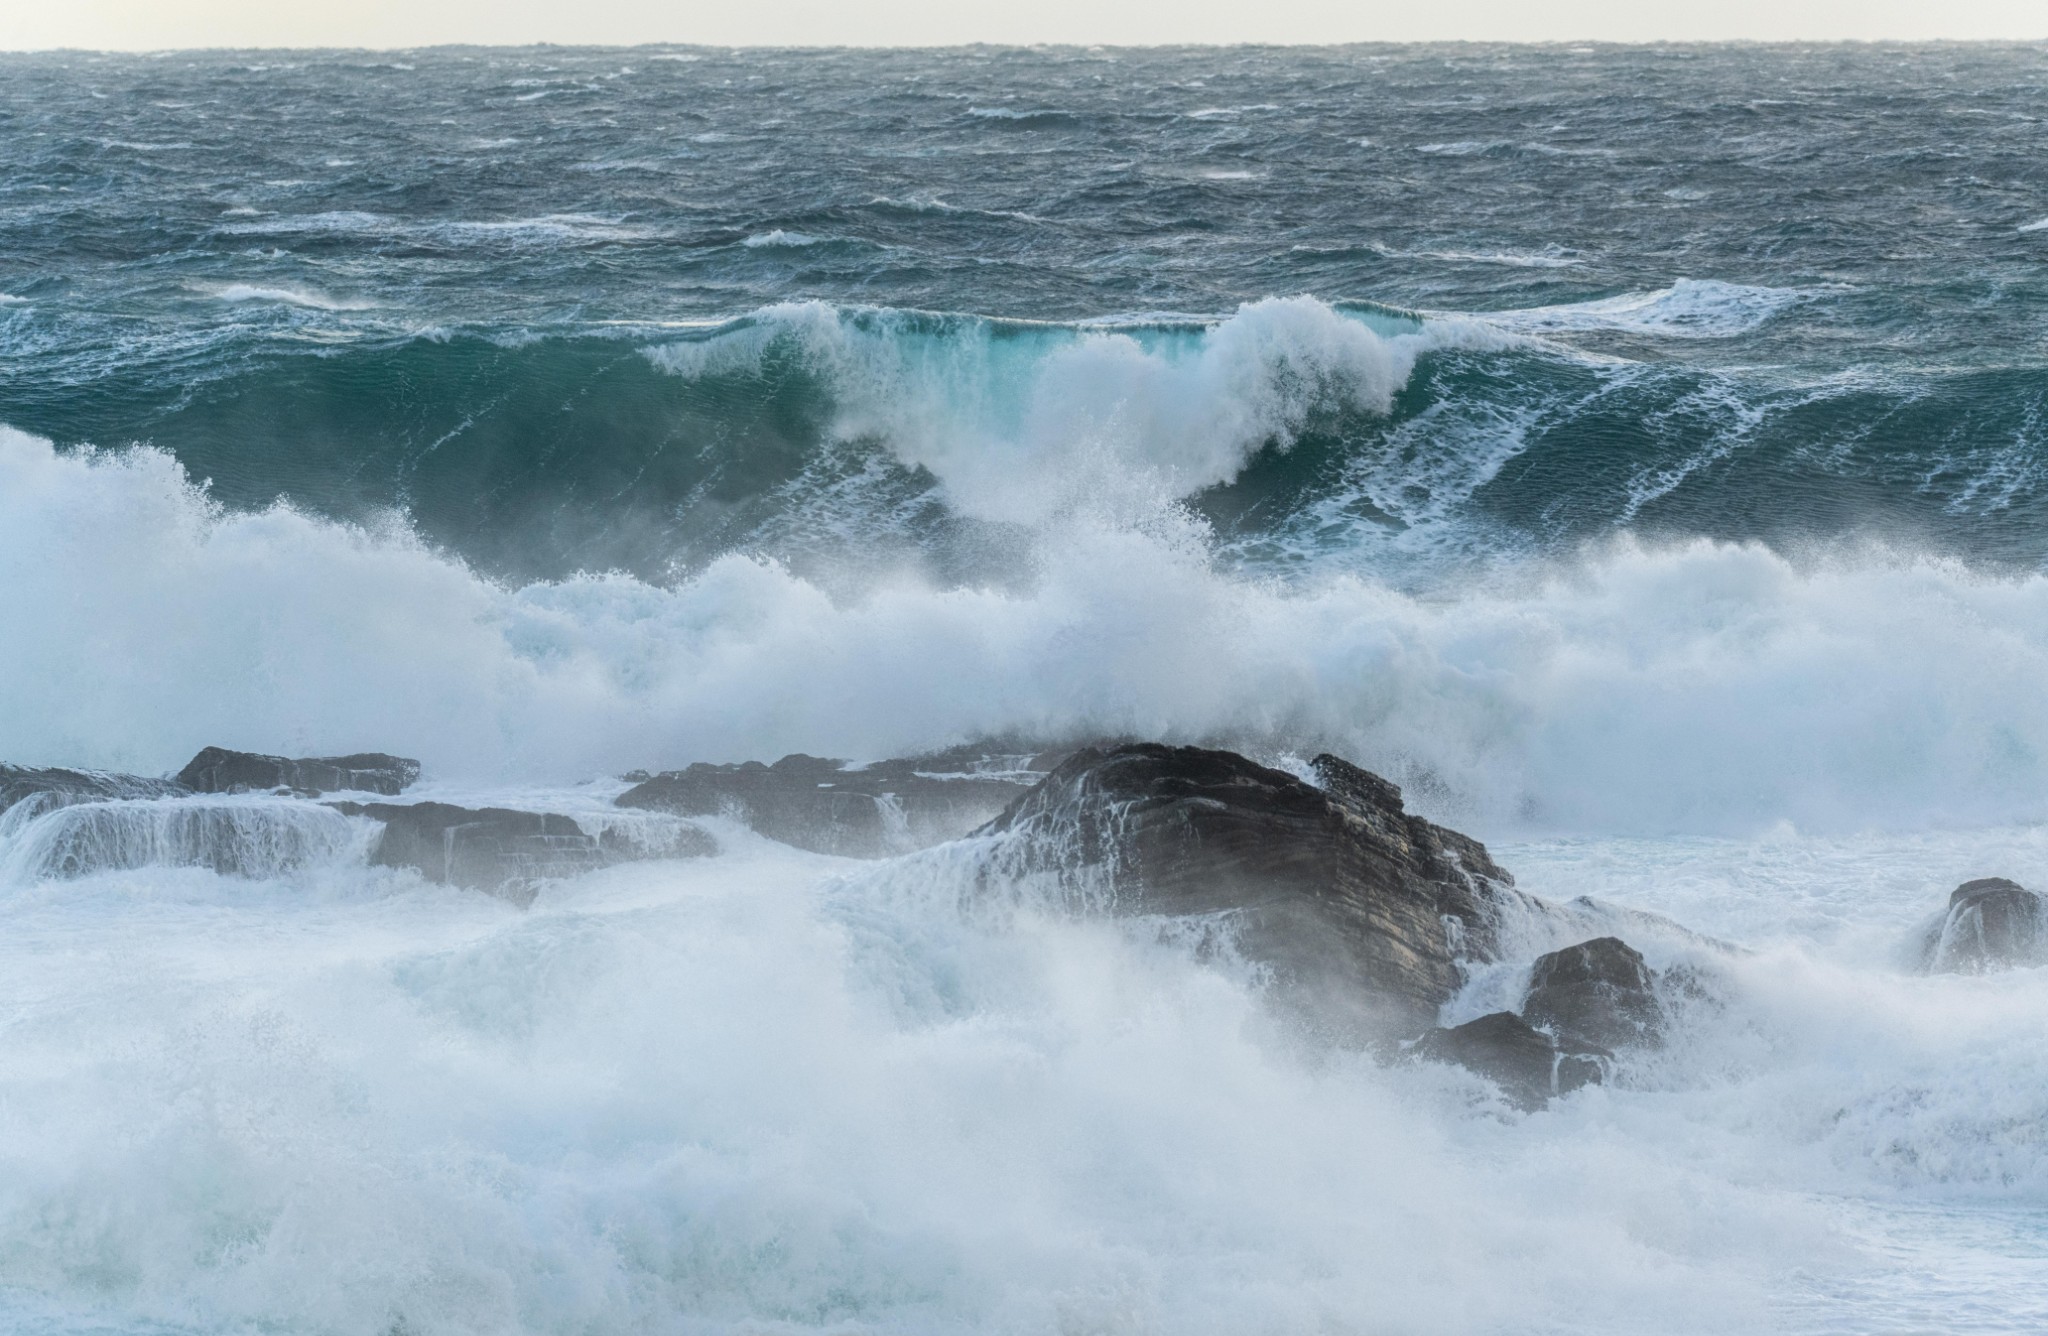 Wild seas in Orkney during Storm Arwen - image by Raymond Besant